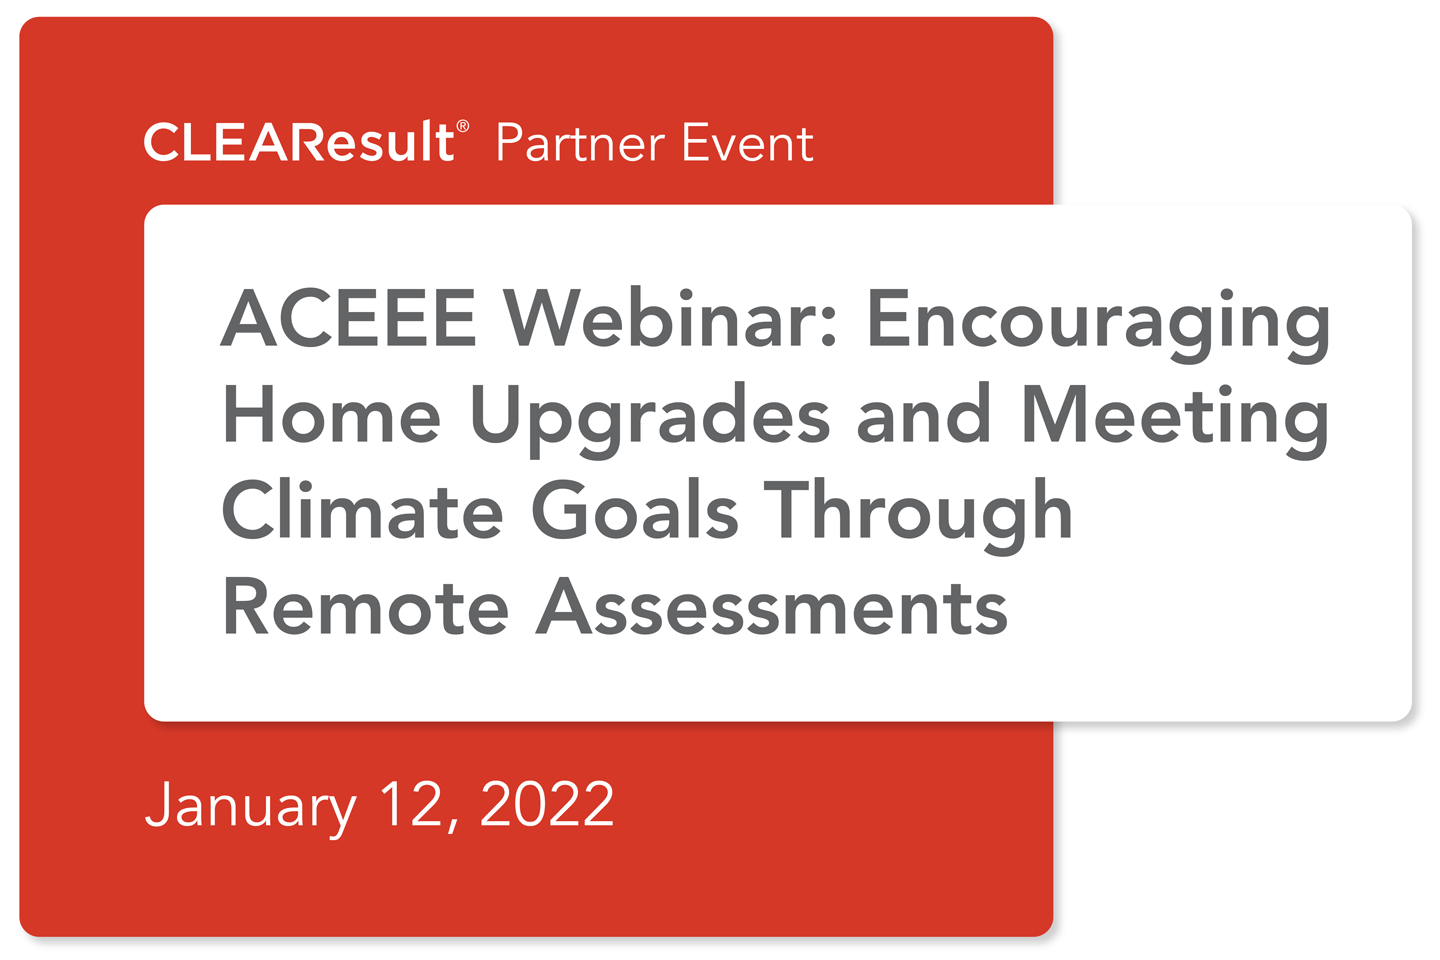 Watch the ACEEE “Encouraging Home Upgrades and Meeting Climate Goals Through Remote Assessments” Webinar 